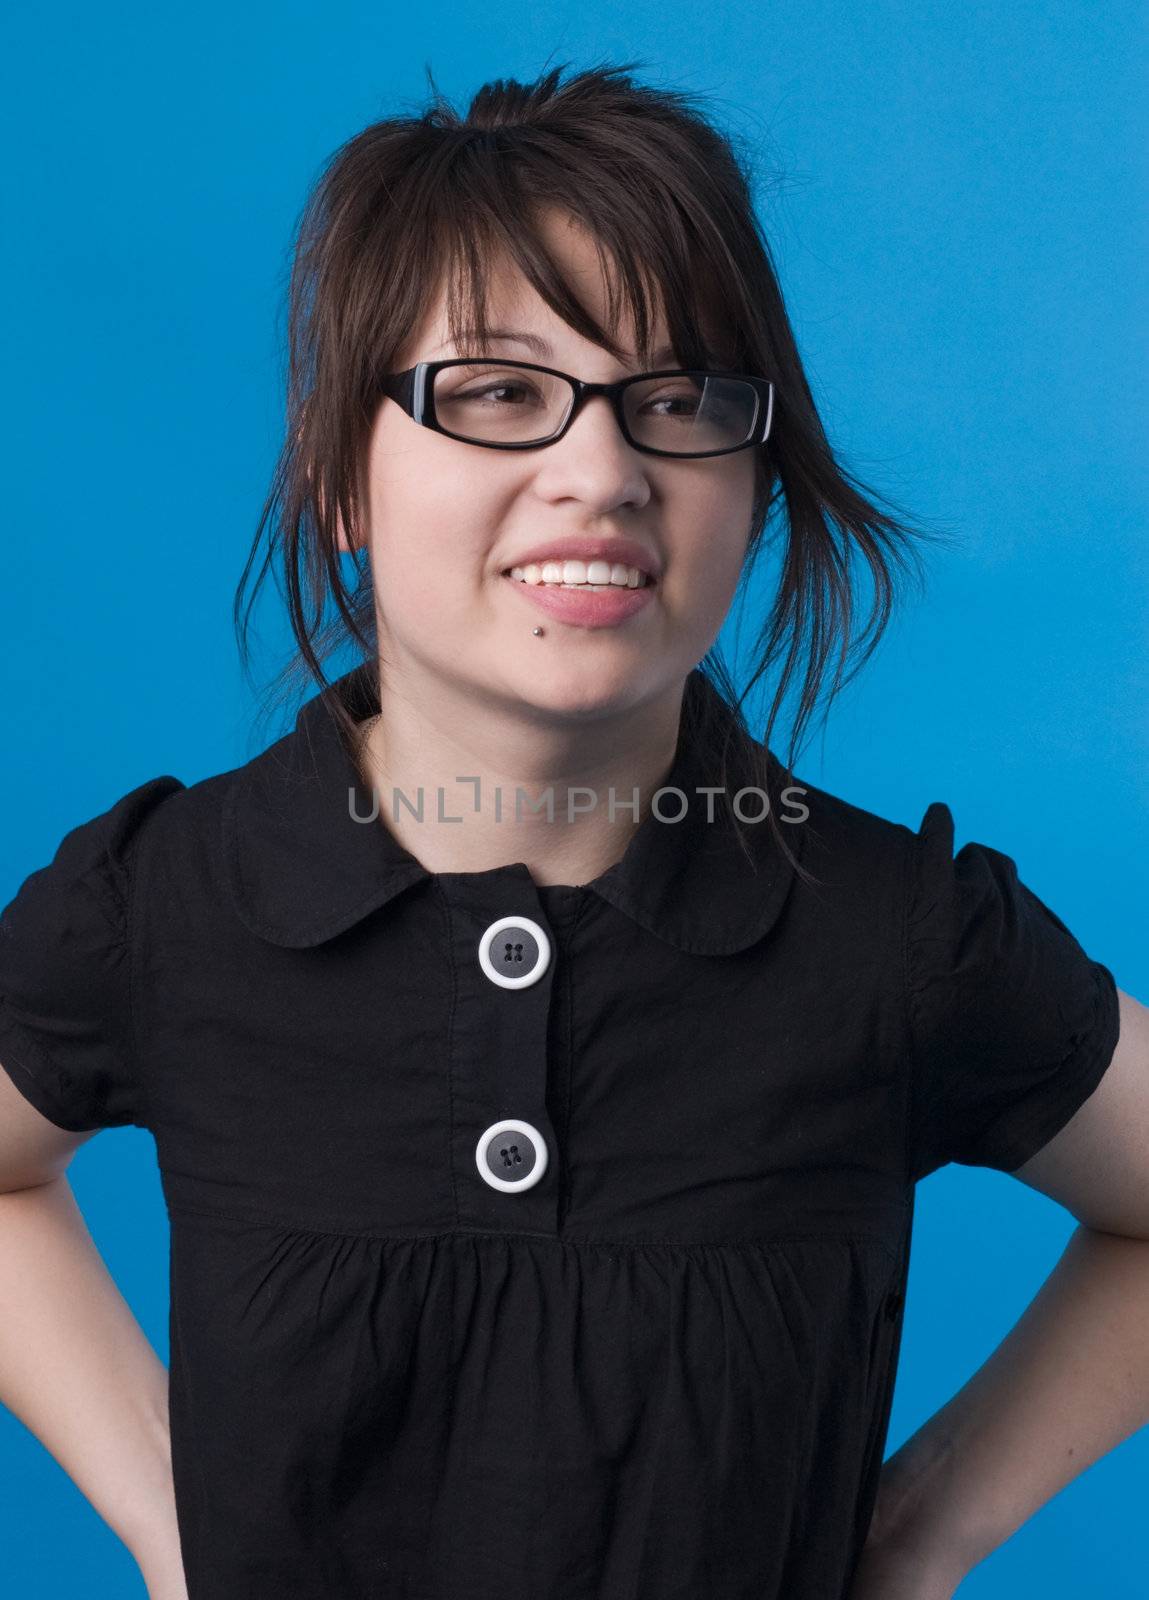 The girl on a dark blue background tries on glasses